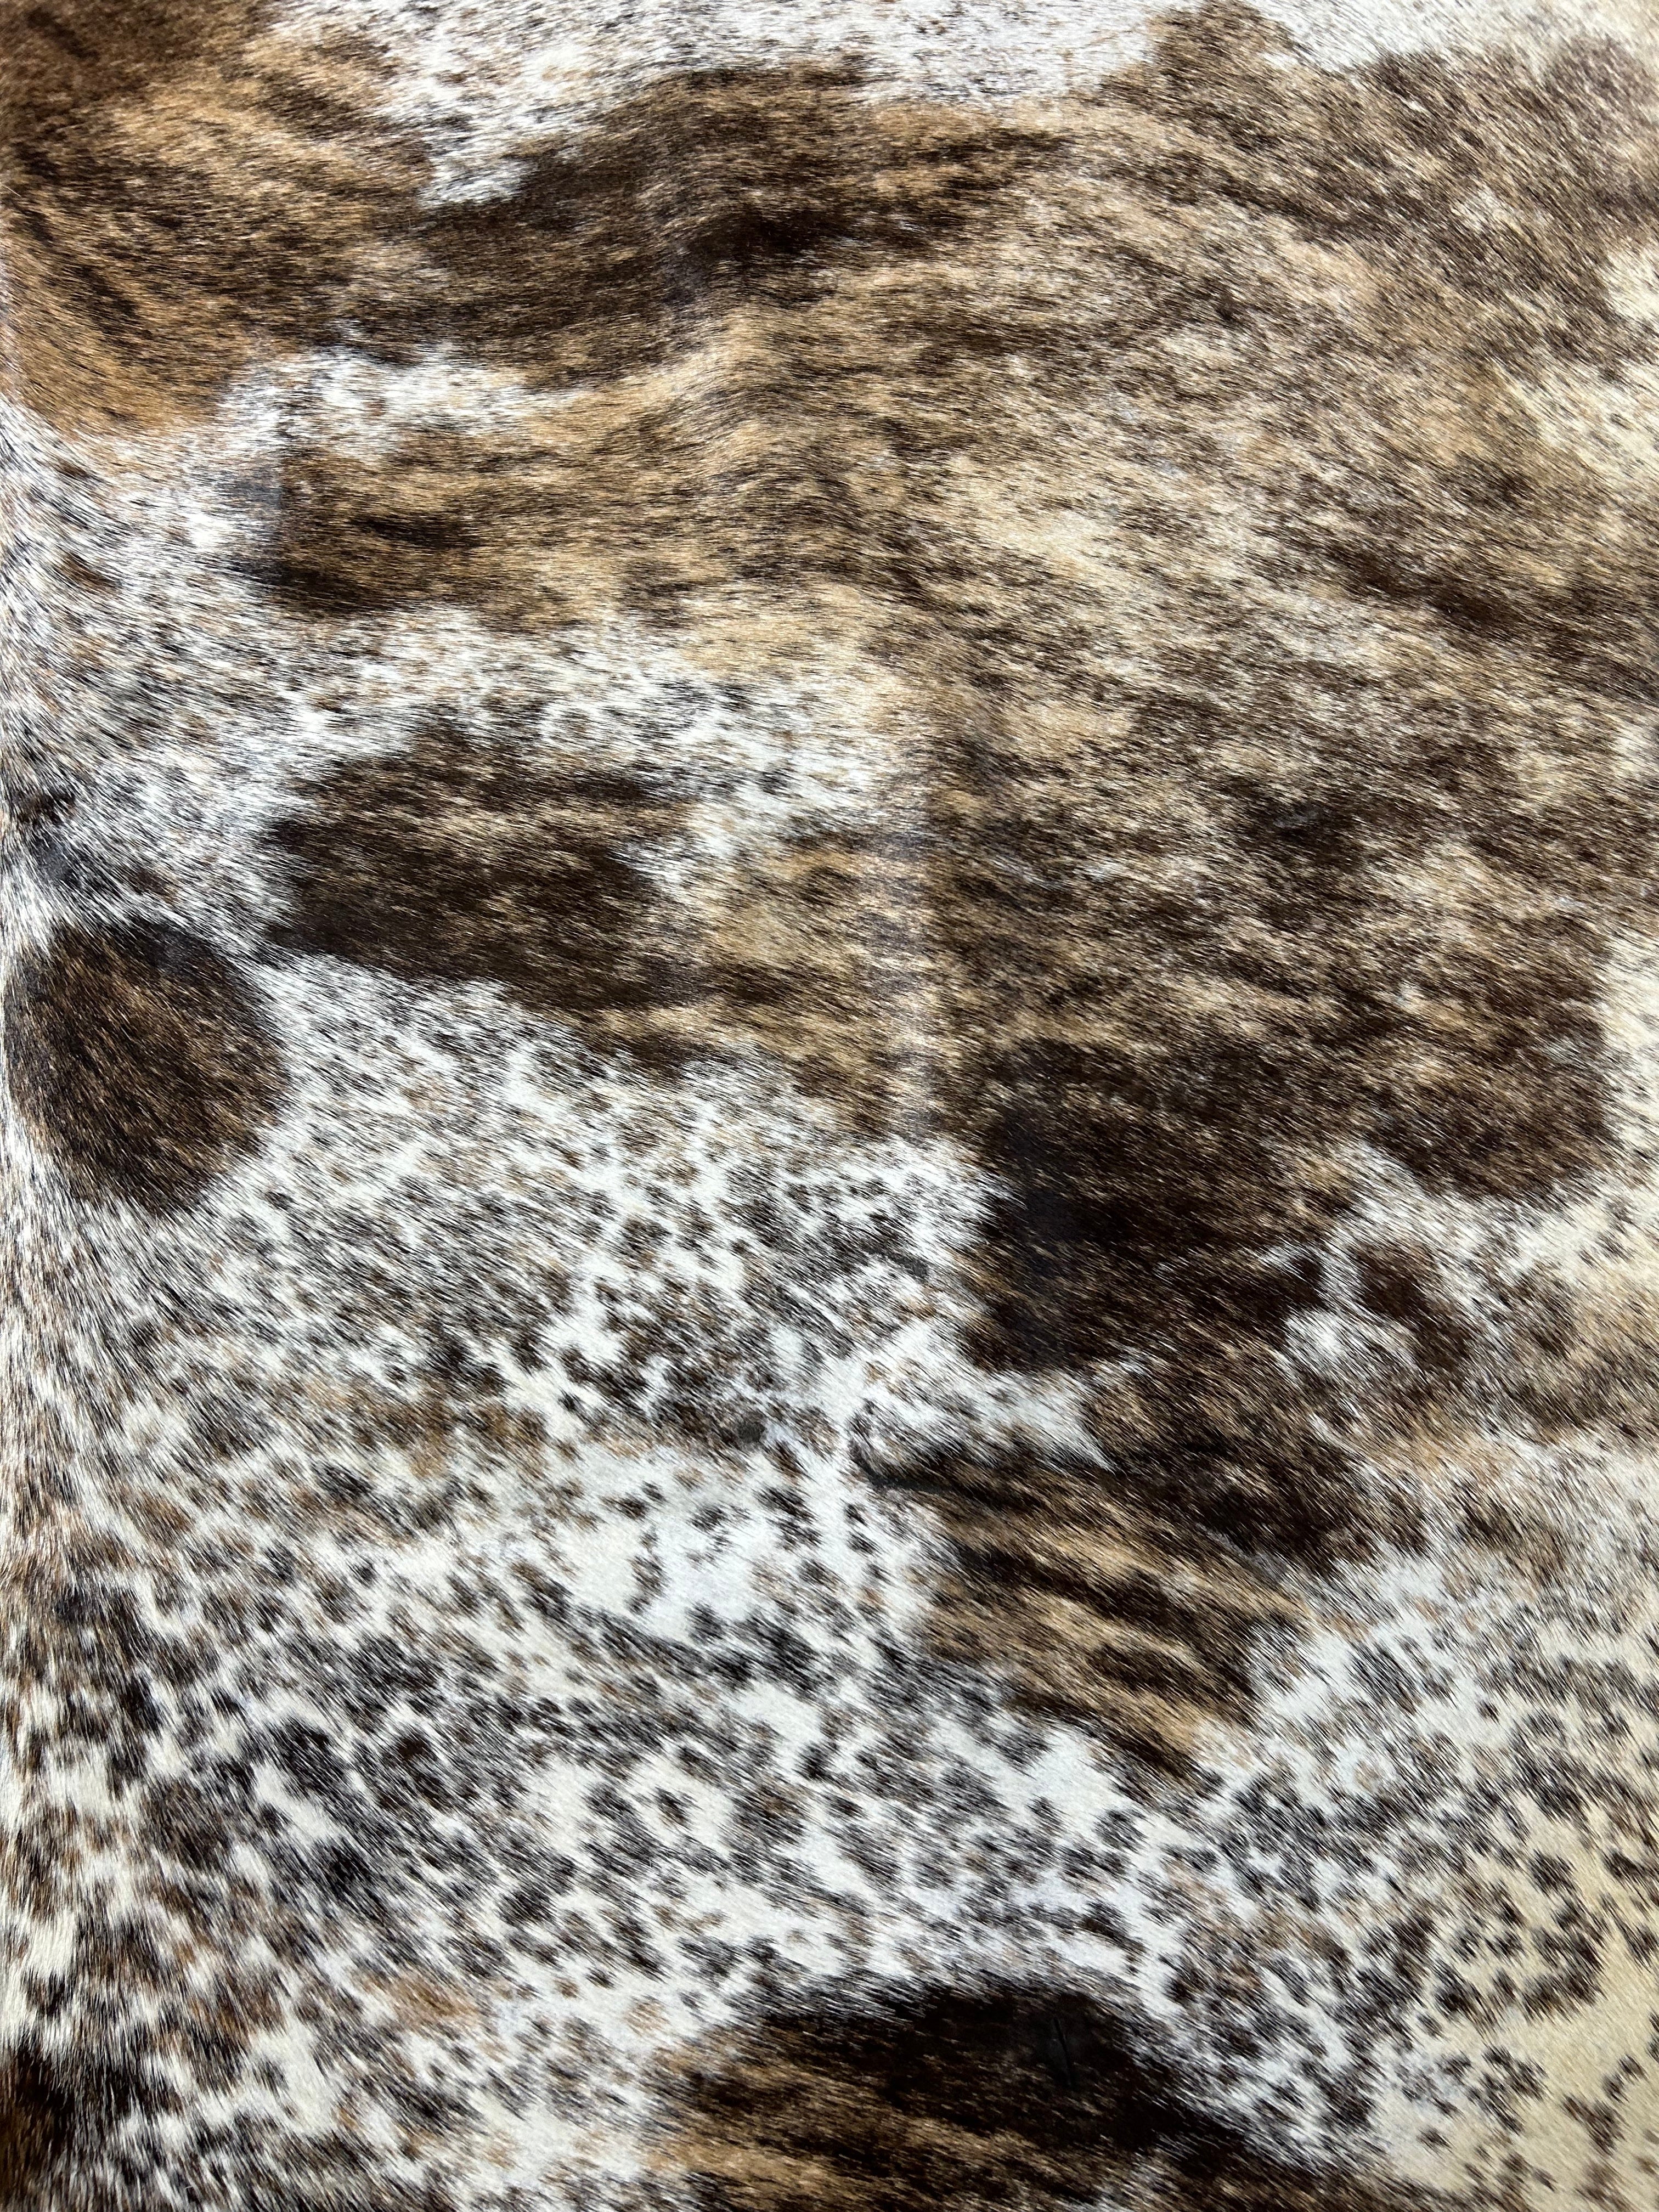 Gorgeous Brazilian Speckled Brindle Tricolor Cowhide Rug Size: 8x7 feet O-405